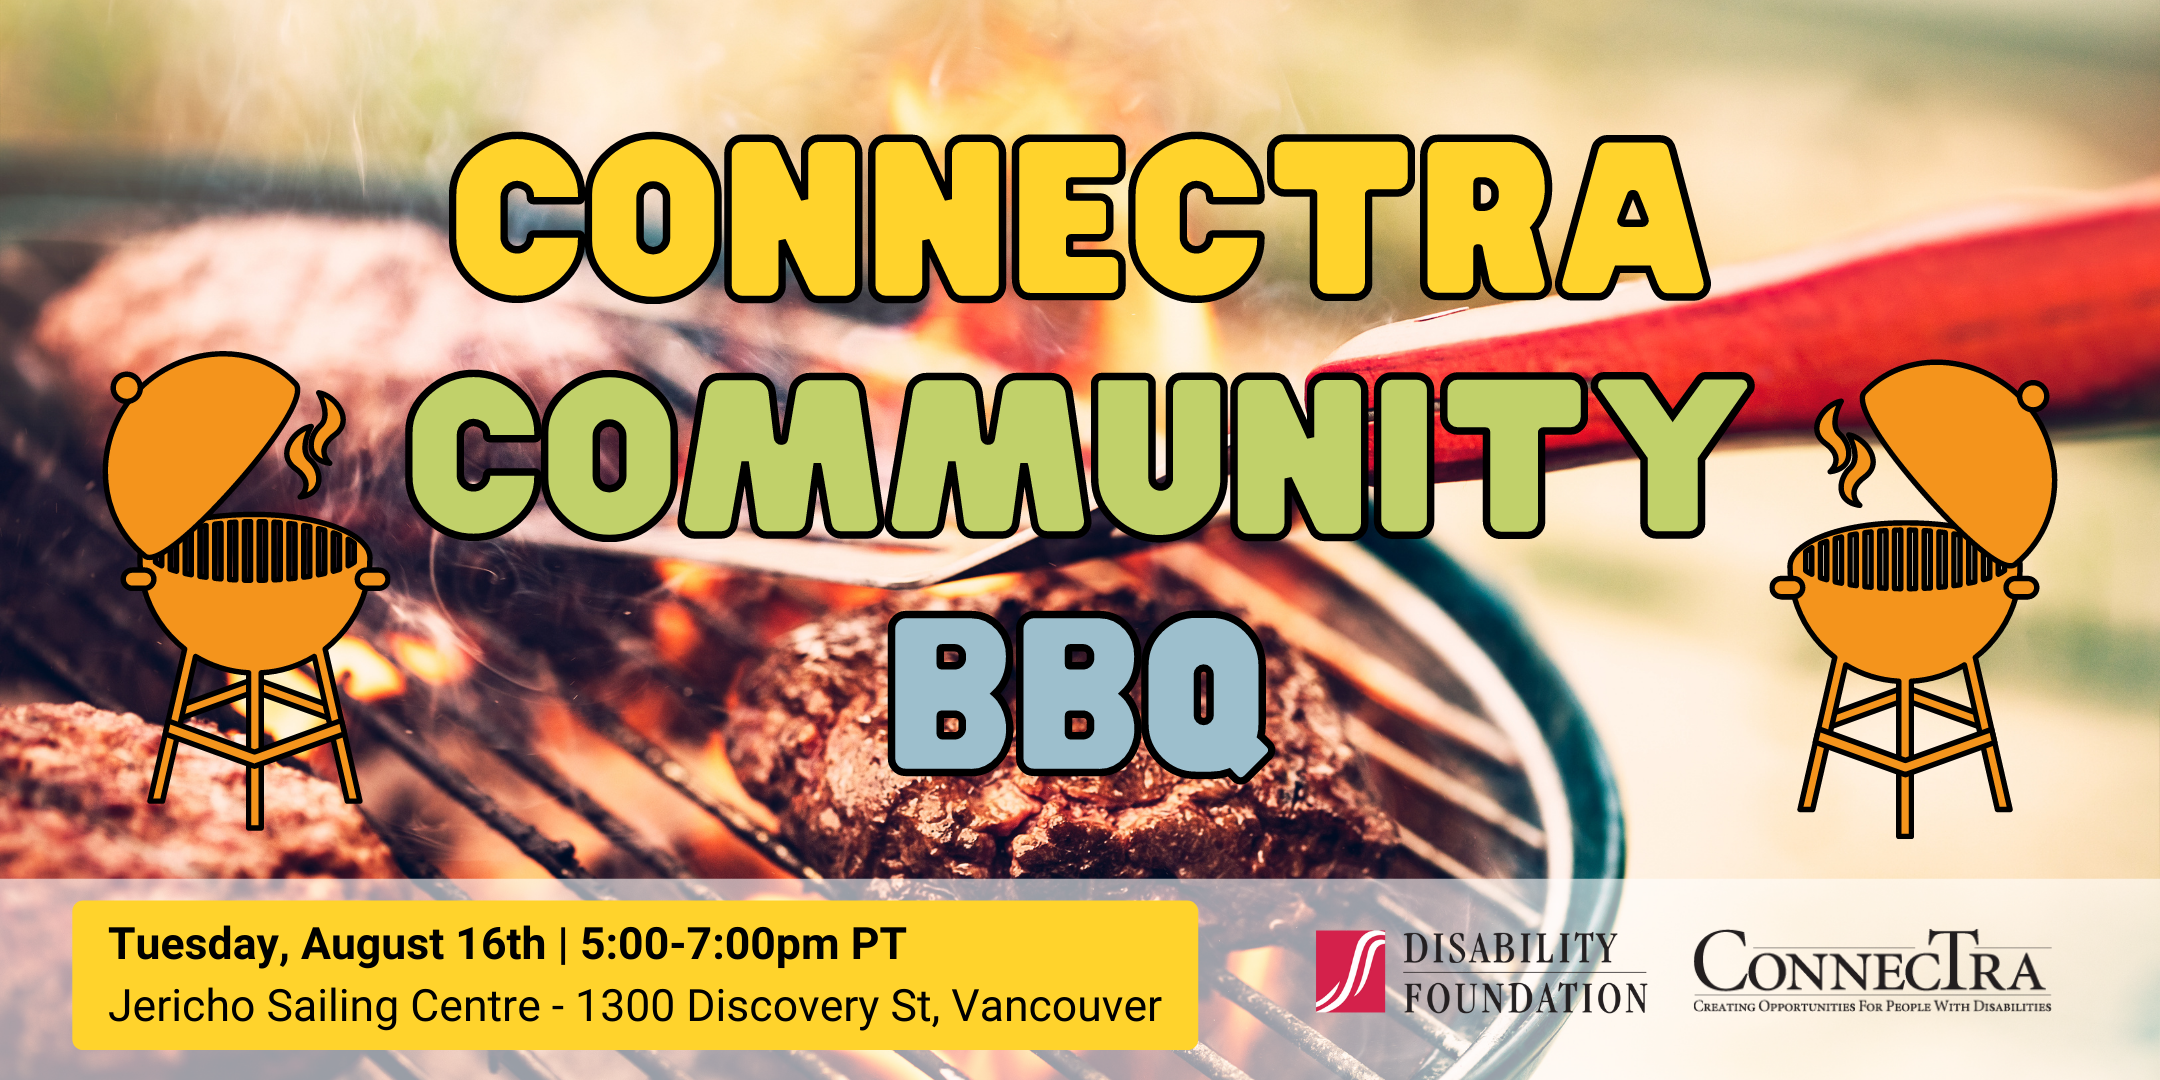 [ConnecTra Community BBQ: Tuesday, August 16th: 5-7pm PDT at Jericho Sailing Centre - 1300 Discovery St, Vancouver